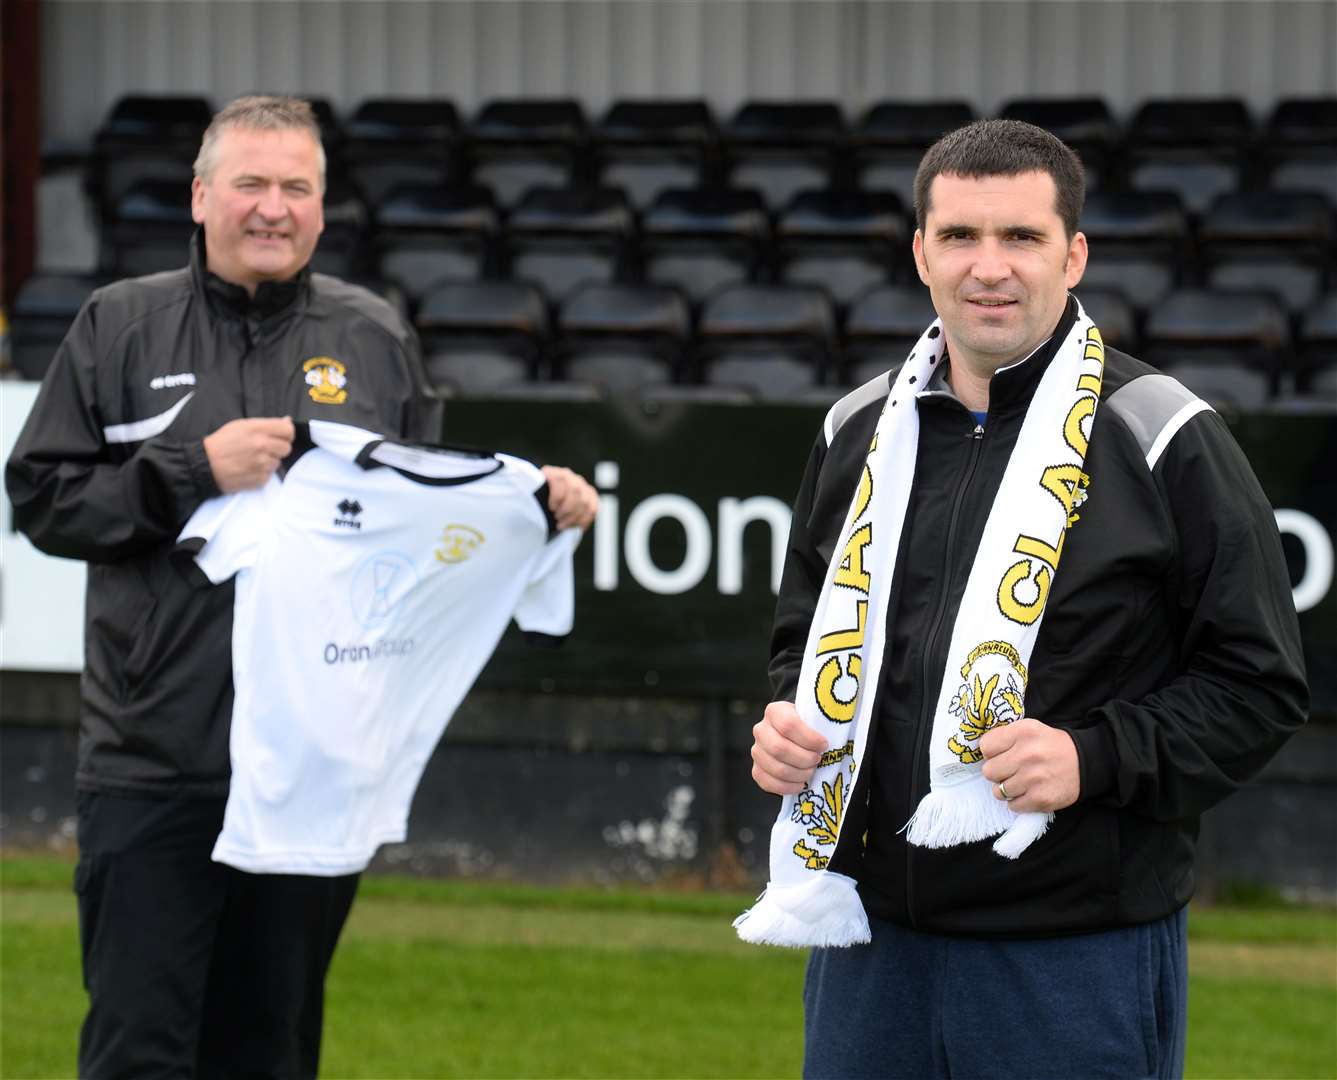 It is three years and one month since Clach chairman Alex Chisholm welcomed Jordan Macdonald as the club's new manager.